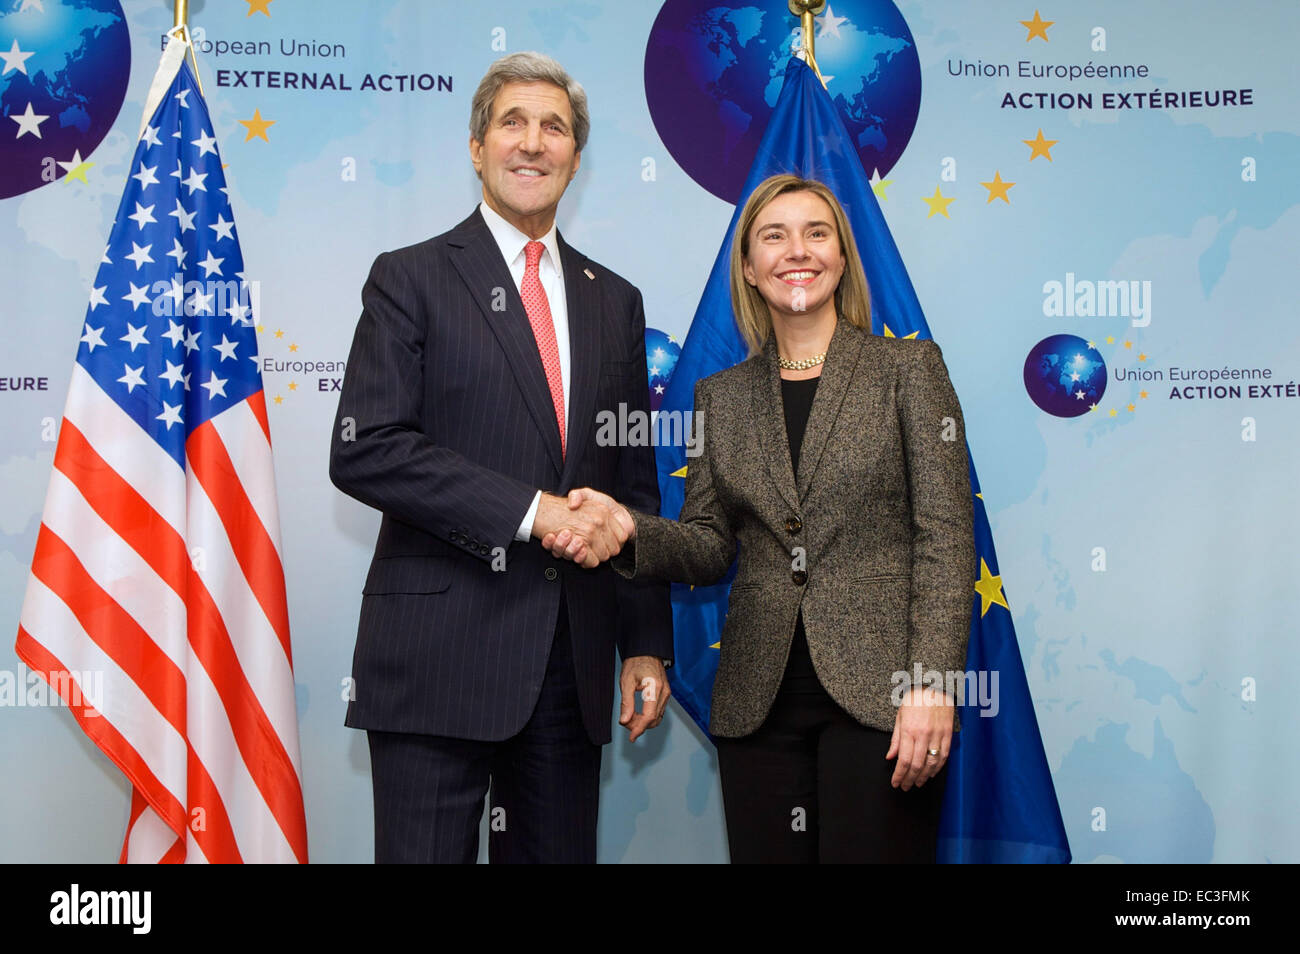 U.S. Secretary of State John Kerry and European Union High Representative for Foreign Affairs Federica Mogherini pose for photographers at the outset of a wide-ranging meeting on December 3, 2014, at the headquarters of the E.U. External Action Service in Brussels, Belgium. Stock Photo